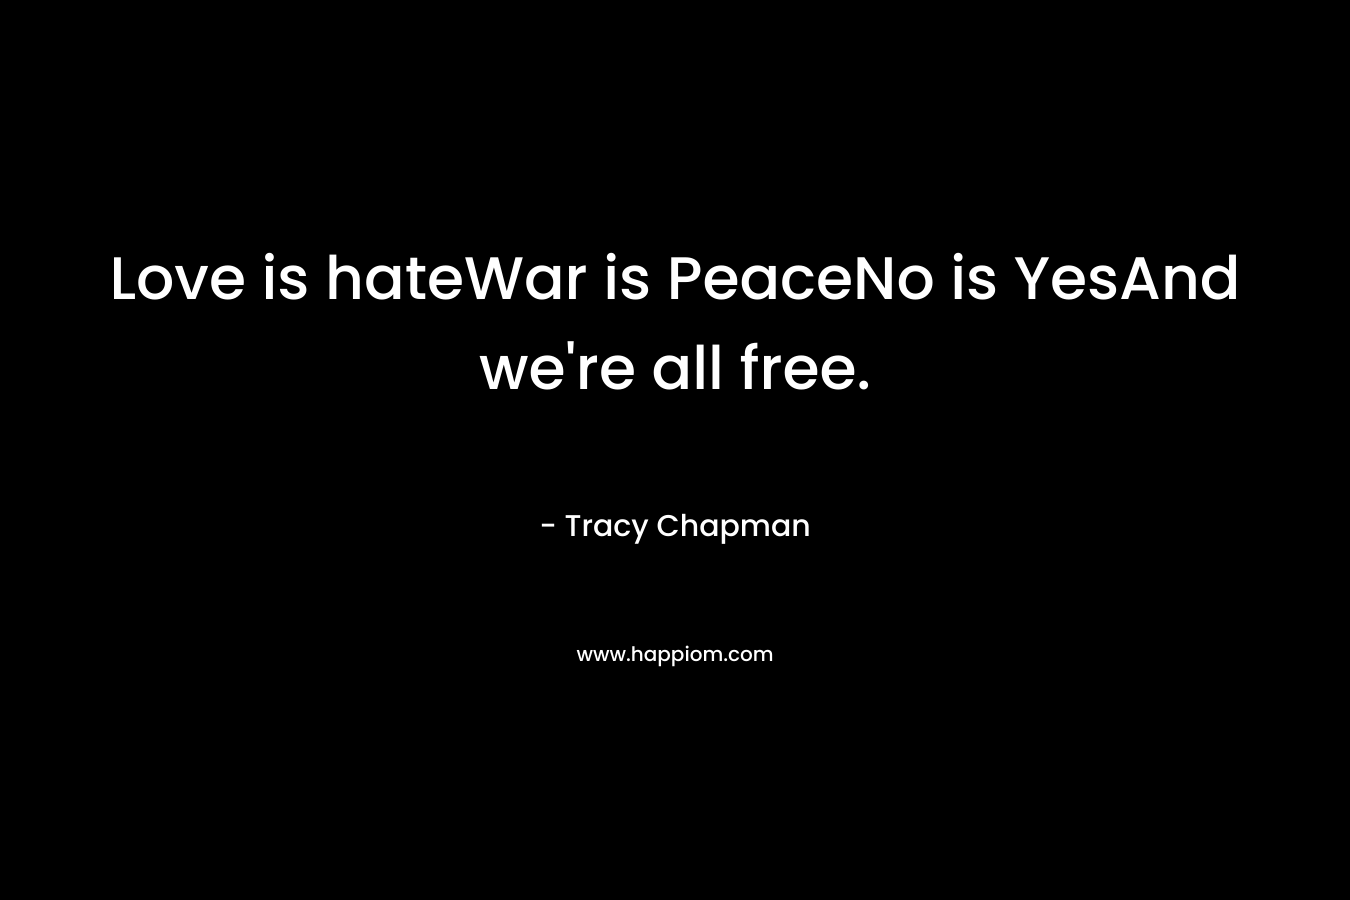 Love is hateWar is PeaceNo is YesAnd we're all free.